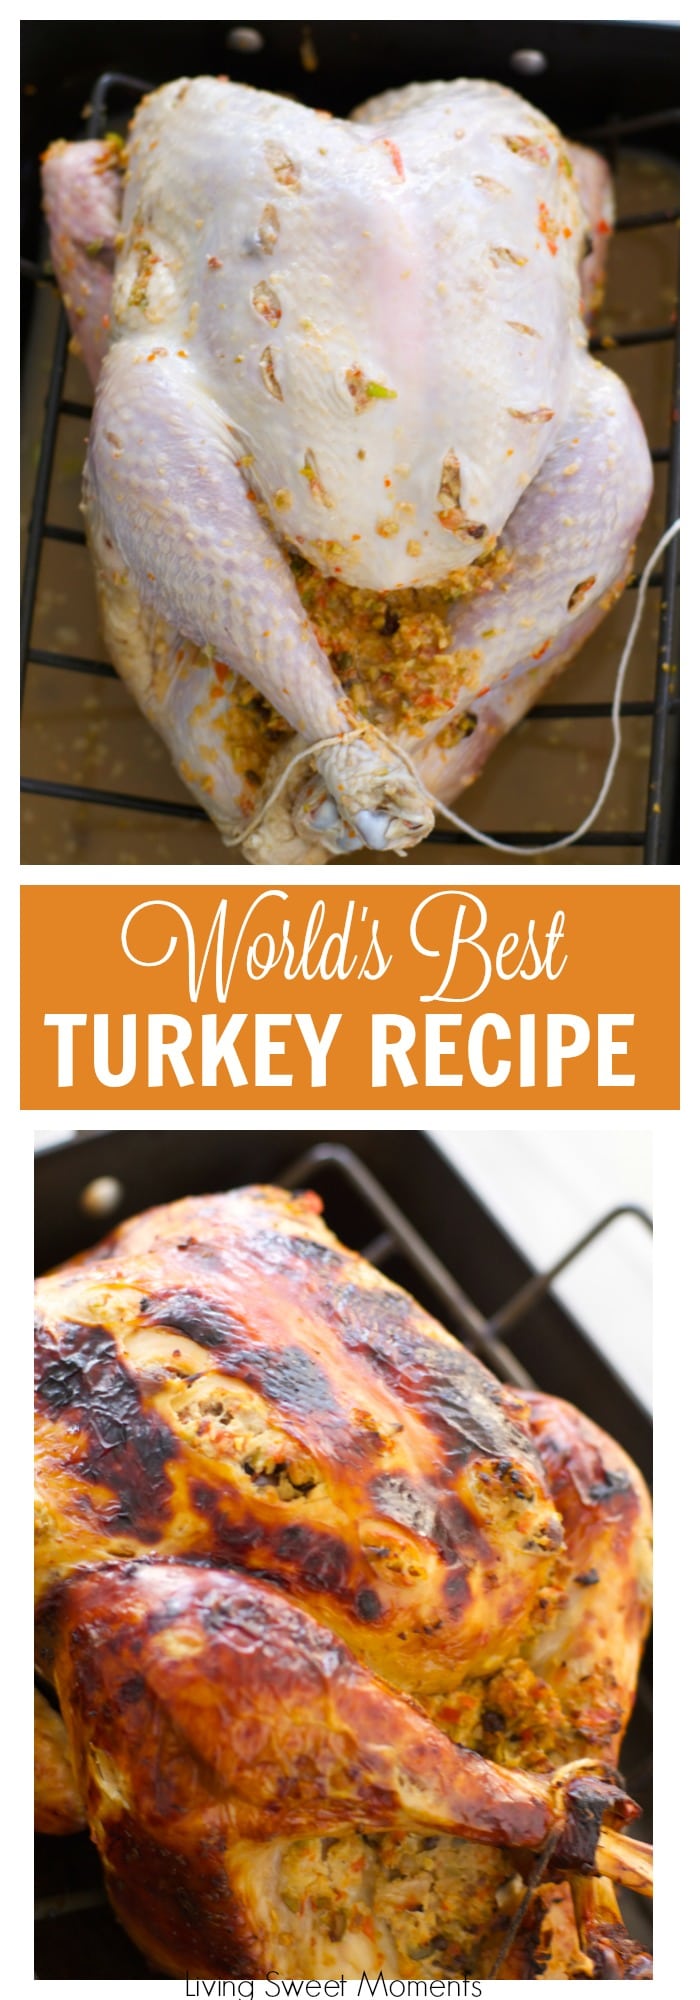 The World's Best Turkey Recipe - A Tutorial - Living Sweet Moments